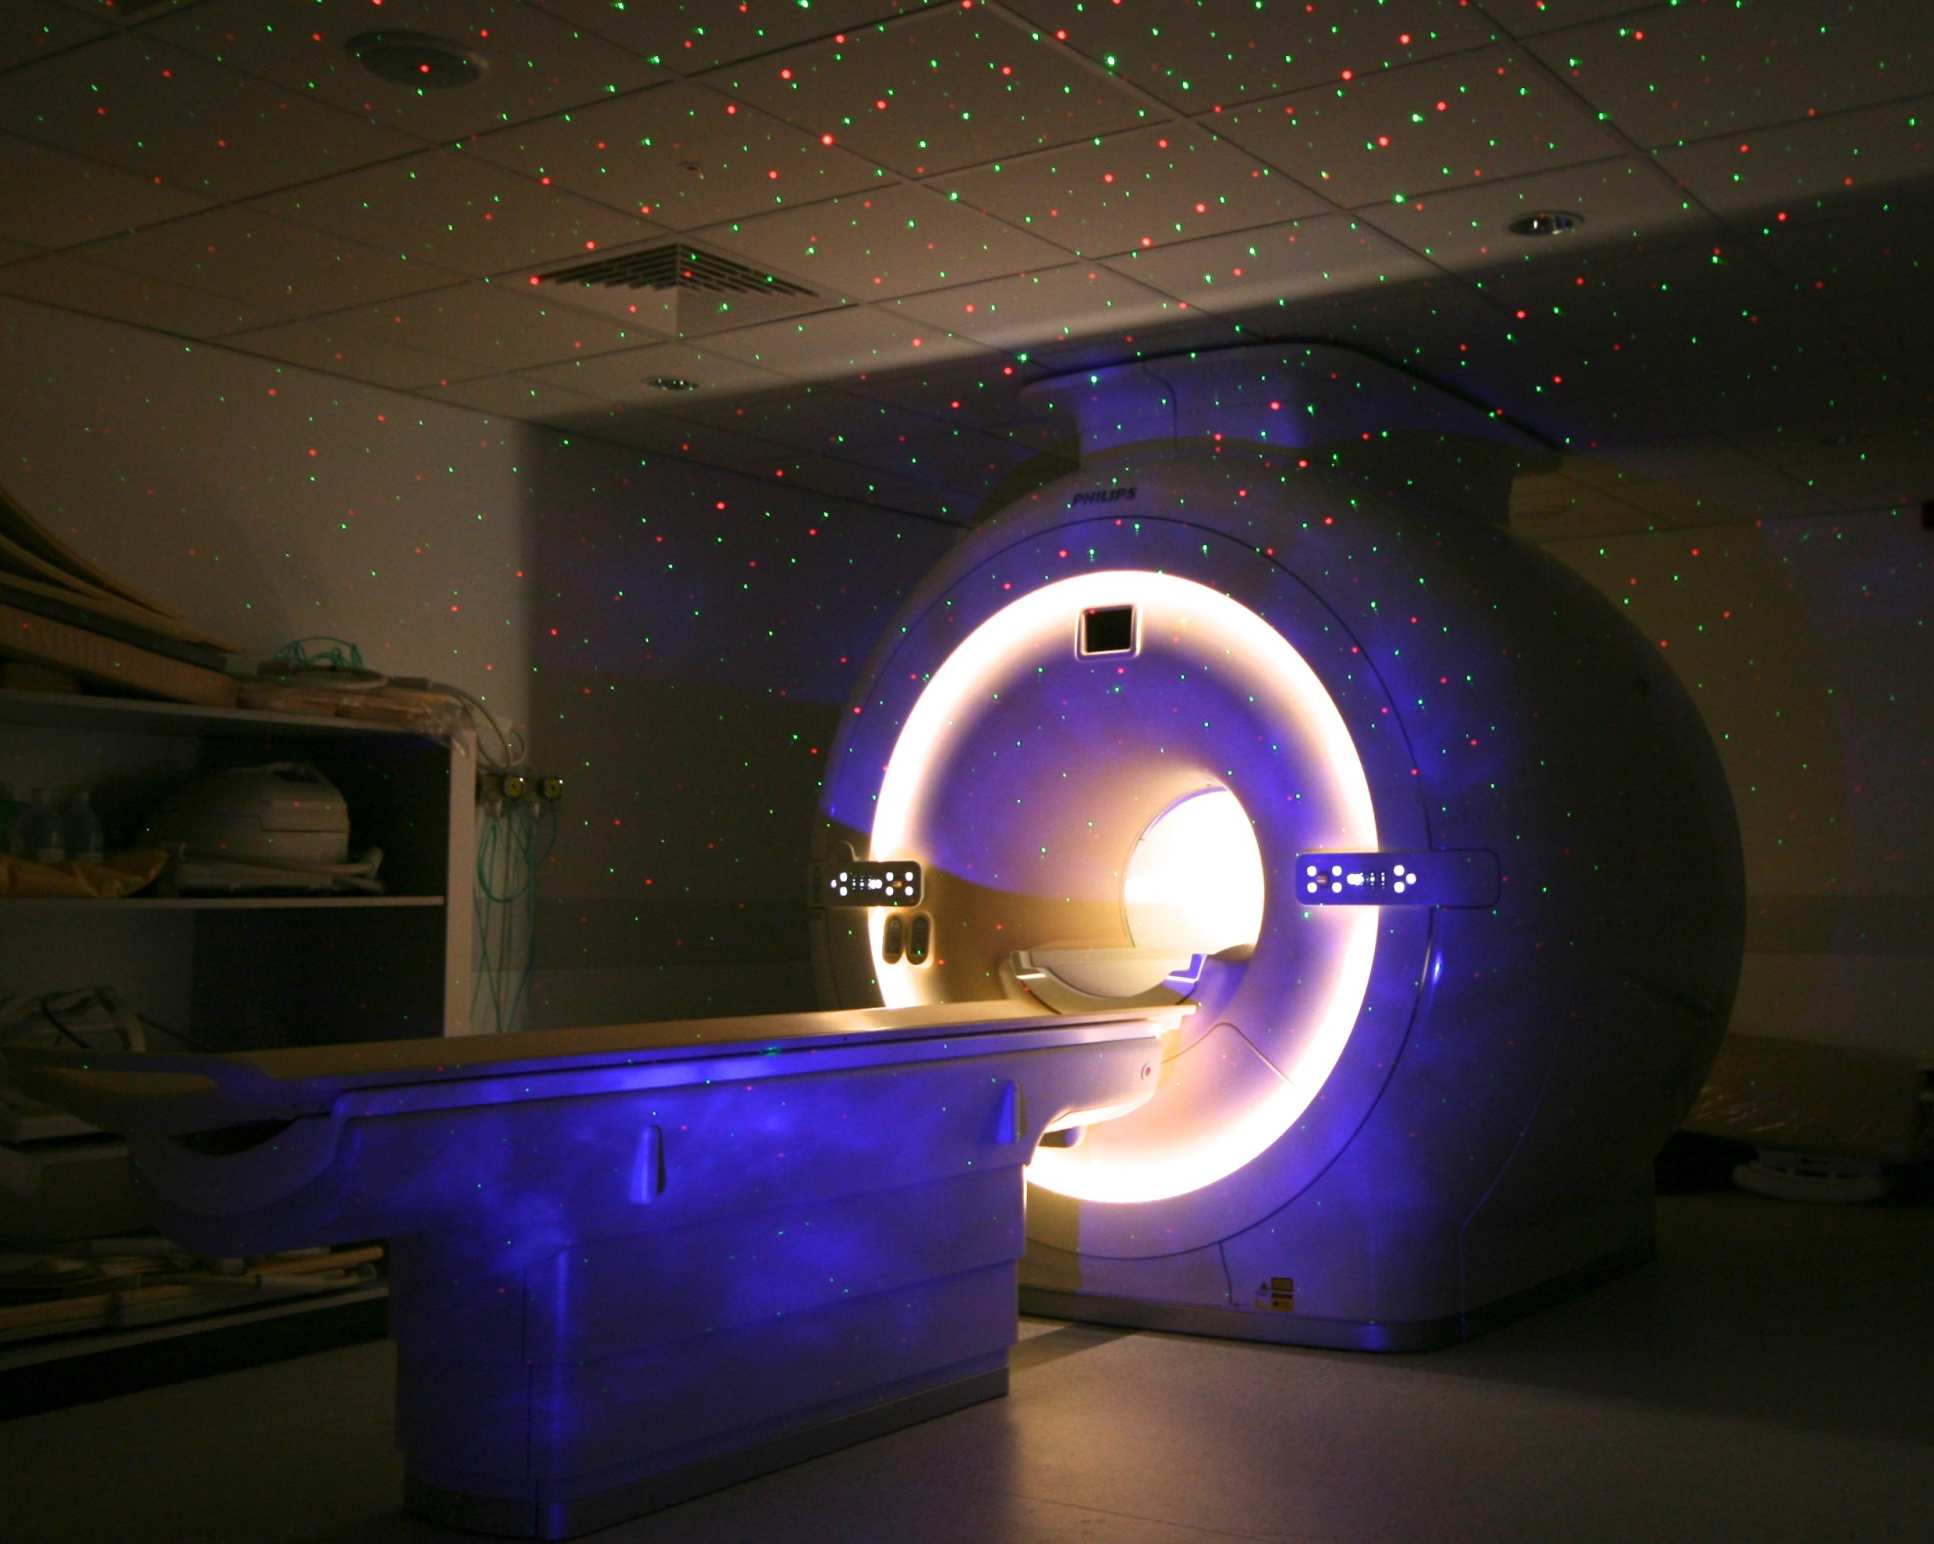 The MRI scanner at the Evelina Newborn Imaging Centre